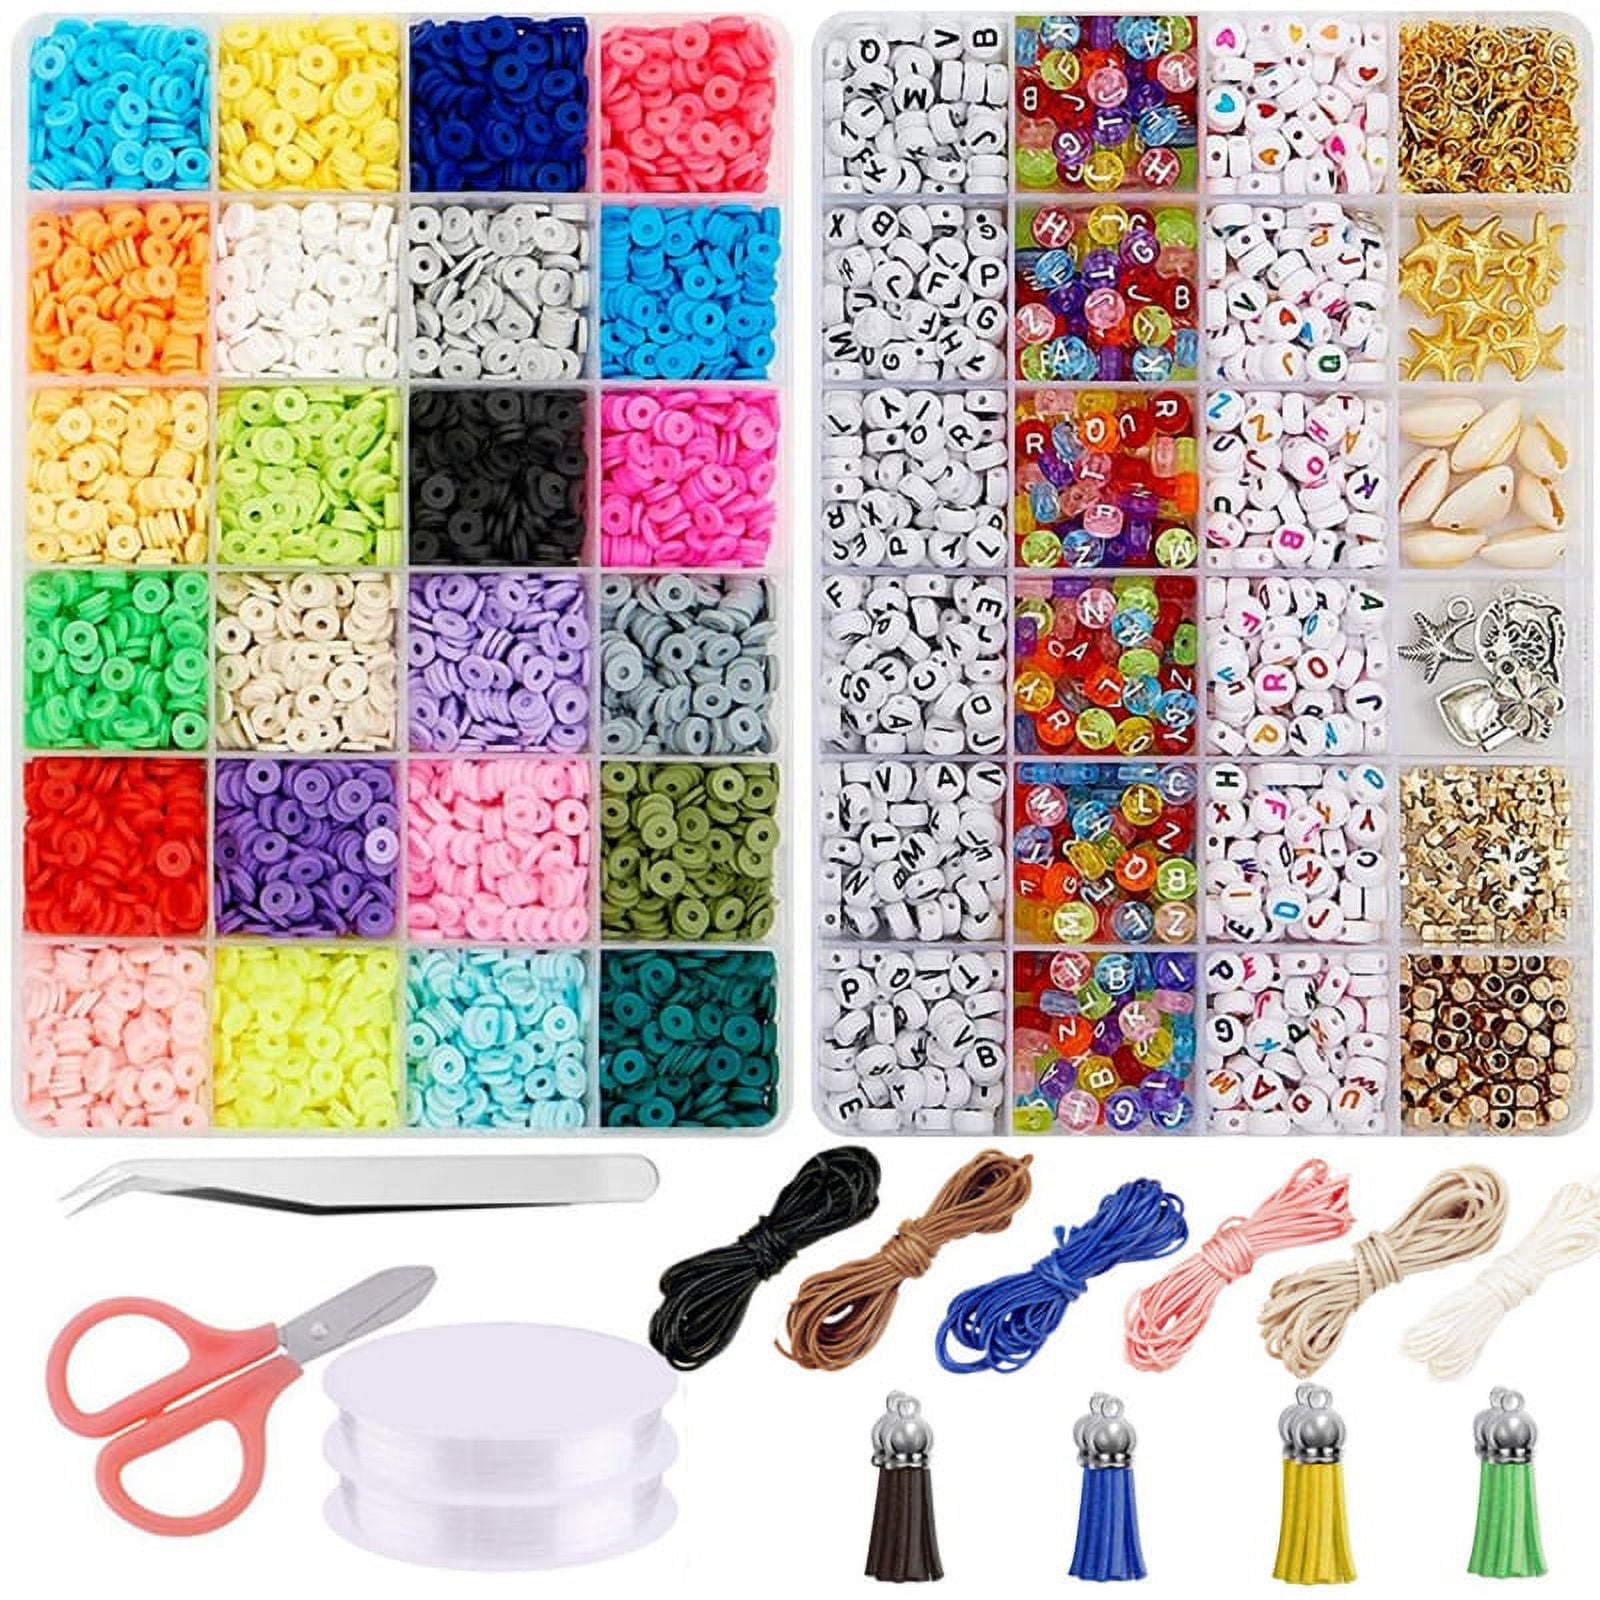 PEACNNG Polymer Clay Beads for Jewelry Making, 18 Colors 6mm Colored Flat  Round Clay Beads for DIY Bracelets Craft Kit with A-Z Letter Beads, Shell  Beads, Elastic Cords, Charms and Jump Rings 